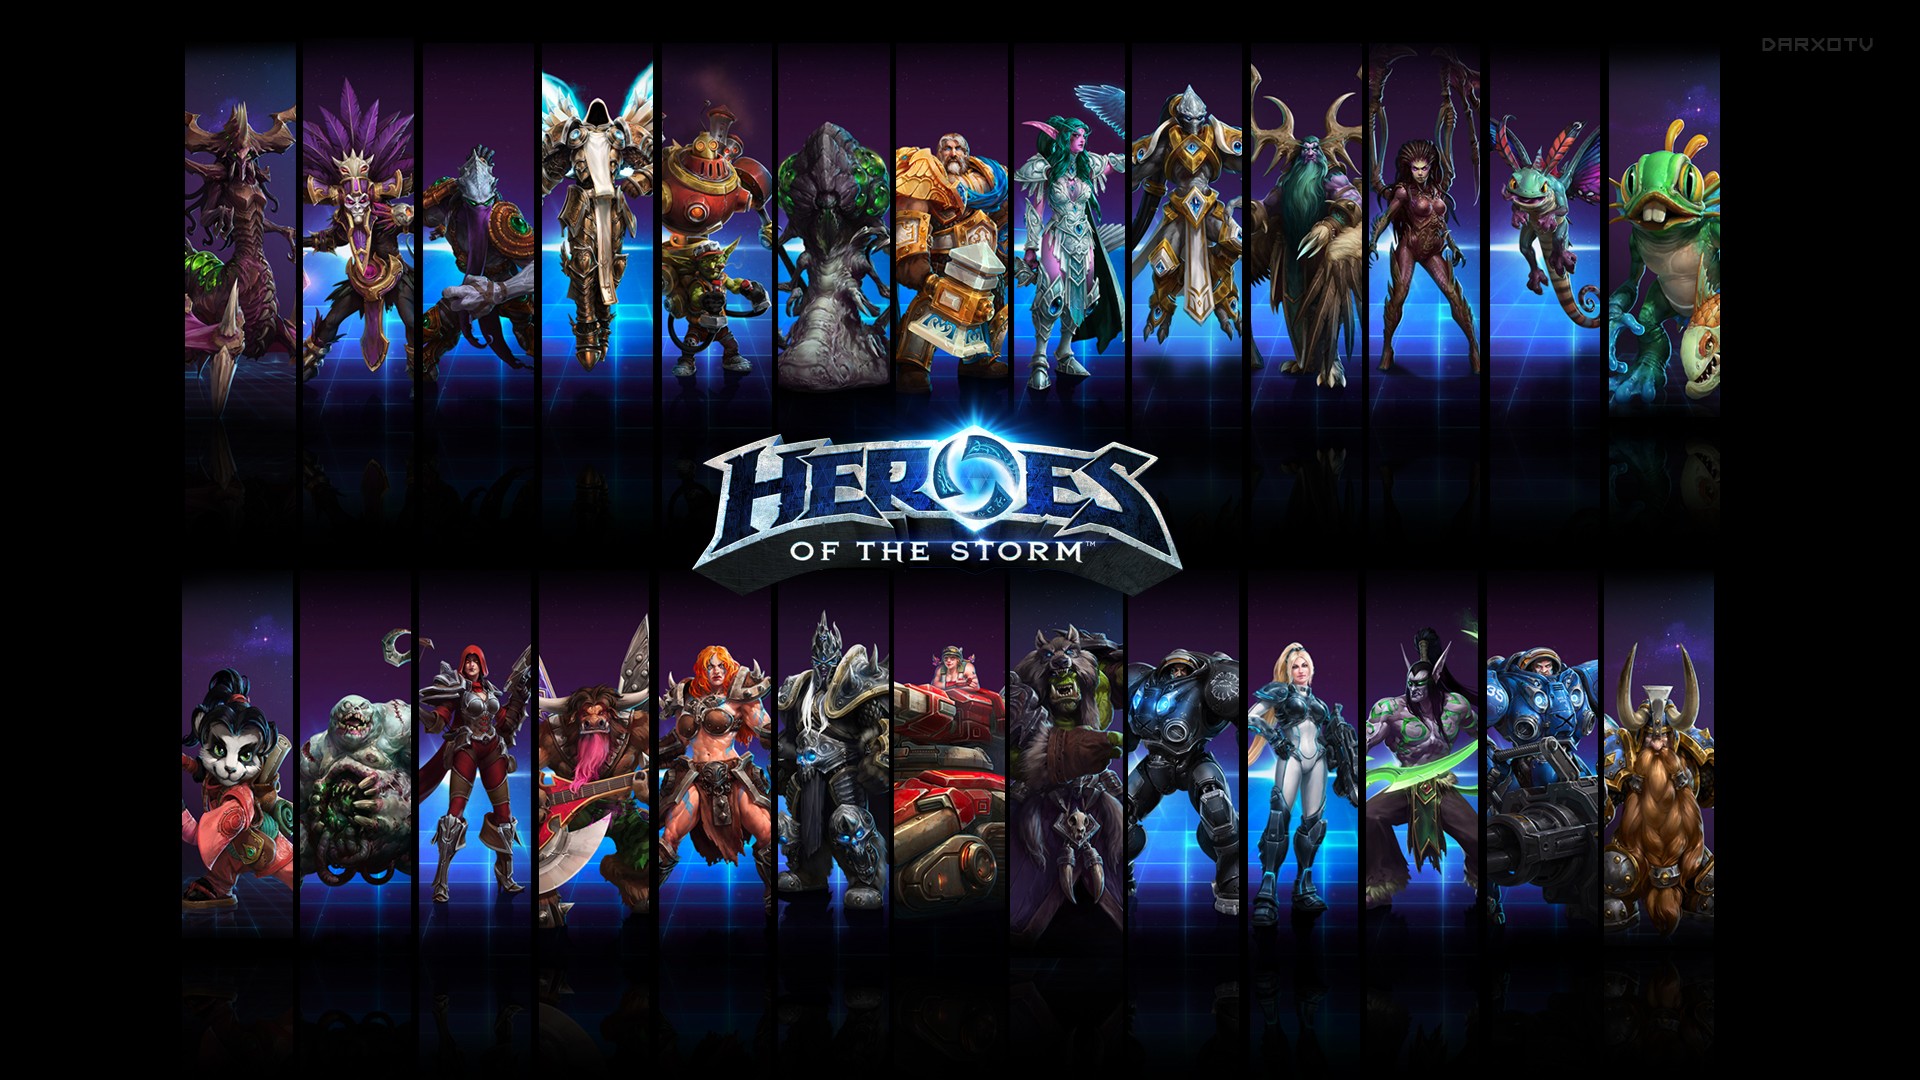 General 1920x1080 Heroes of the Storm Blizzard Entertainment collage PC gaming